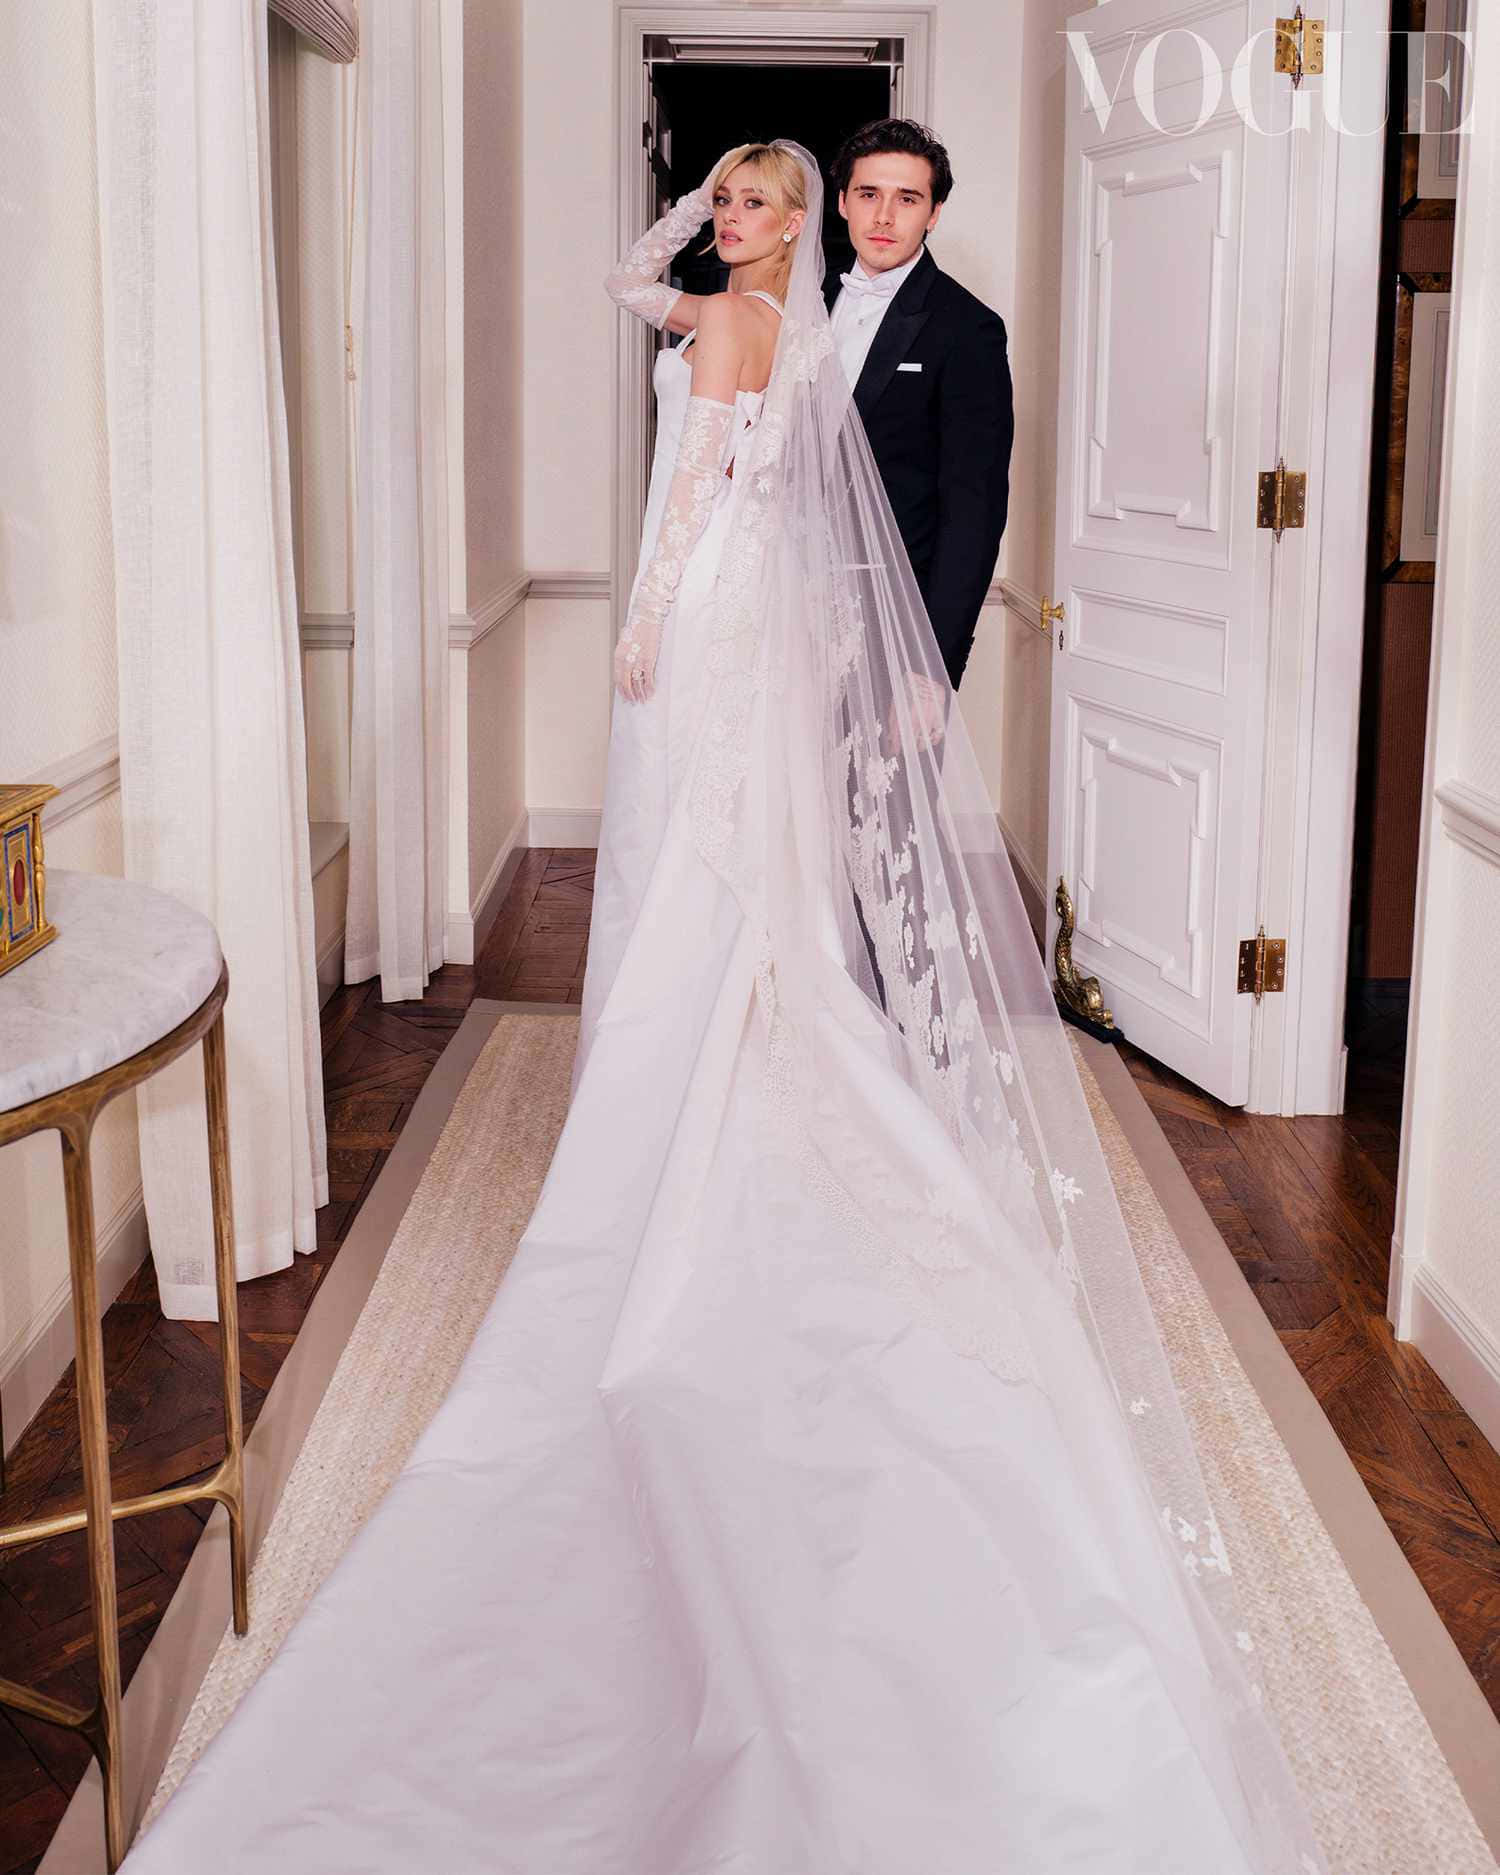 A Bride And Groom Standing In A Hallway